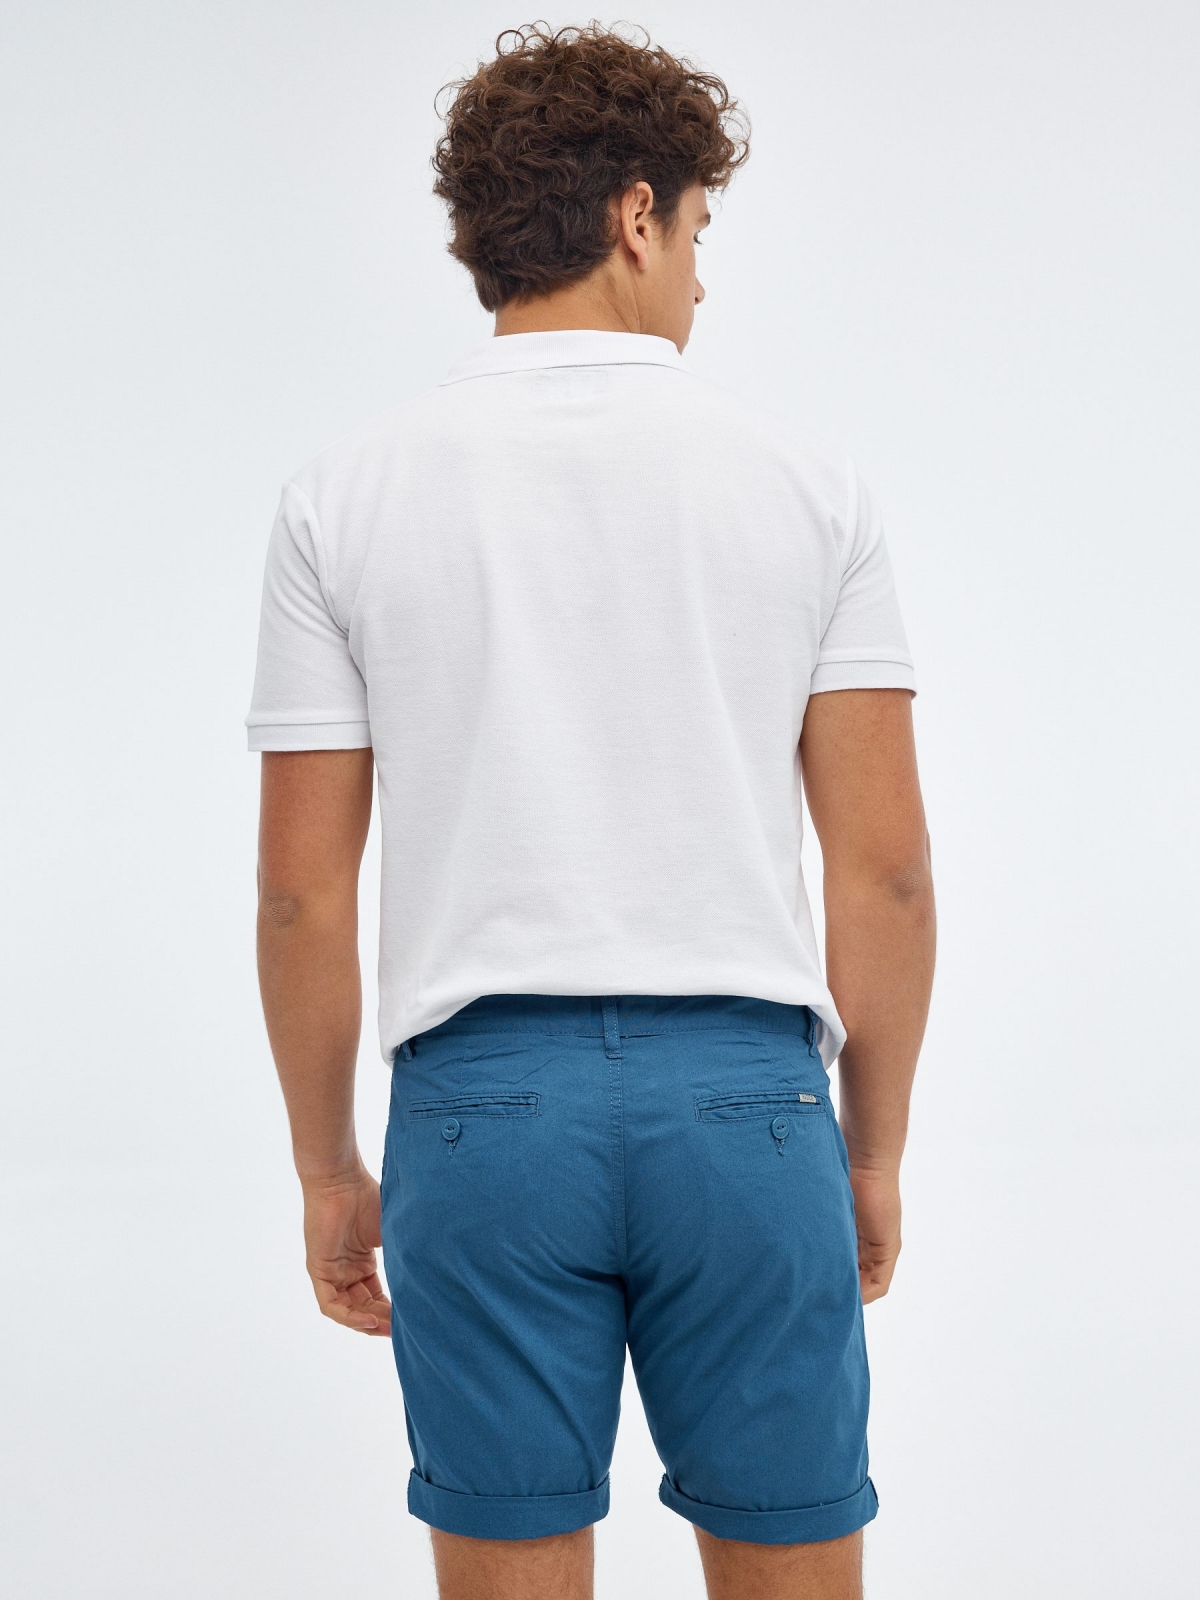 Poplin shorts blue middle back view